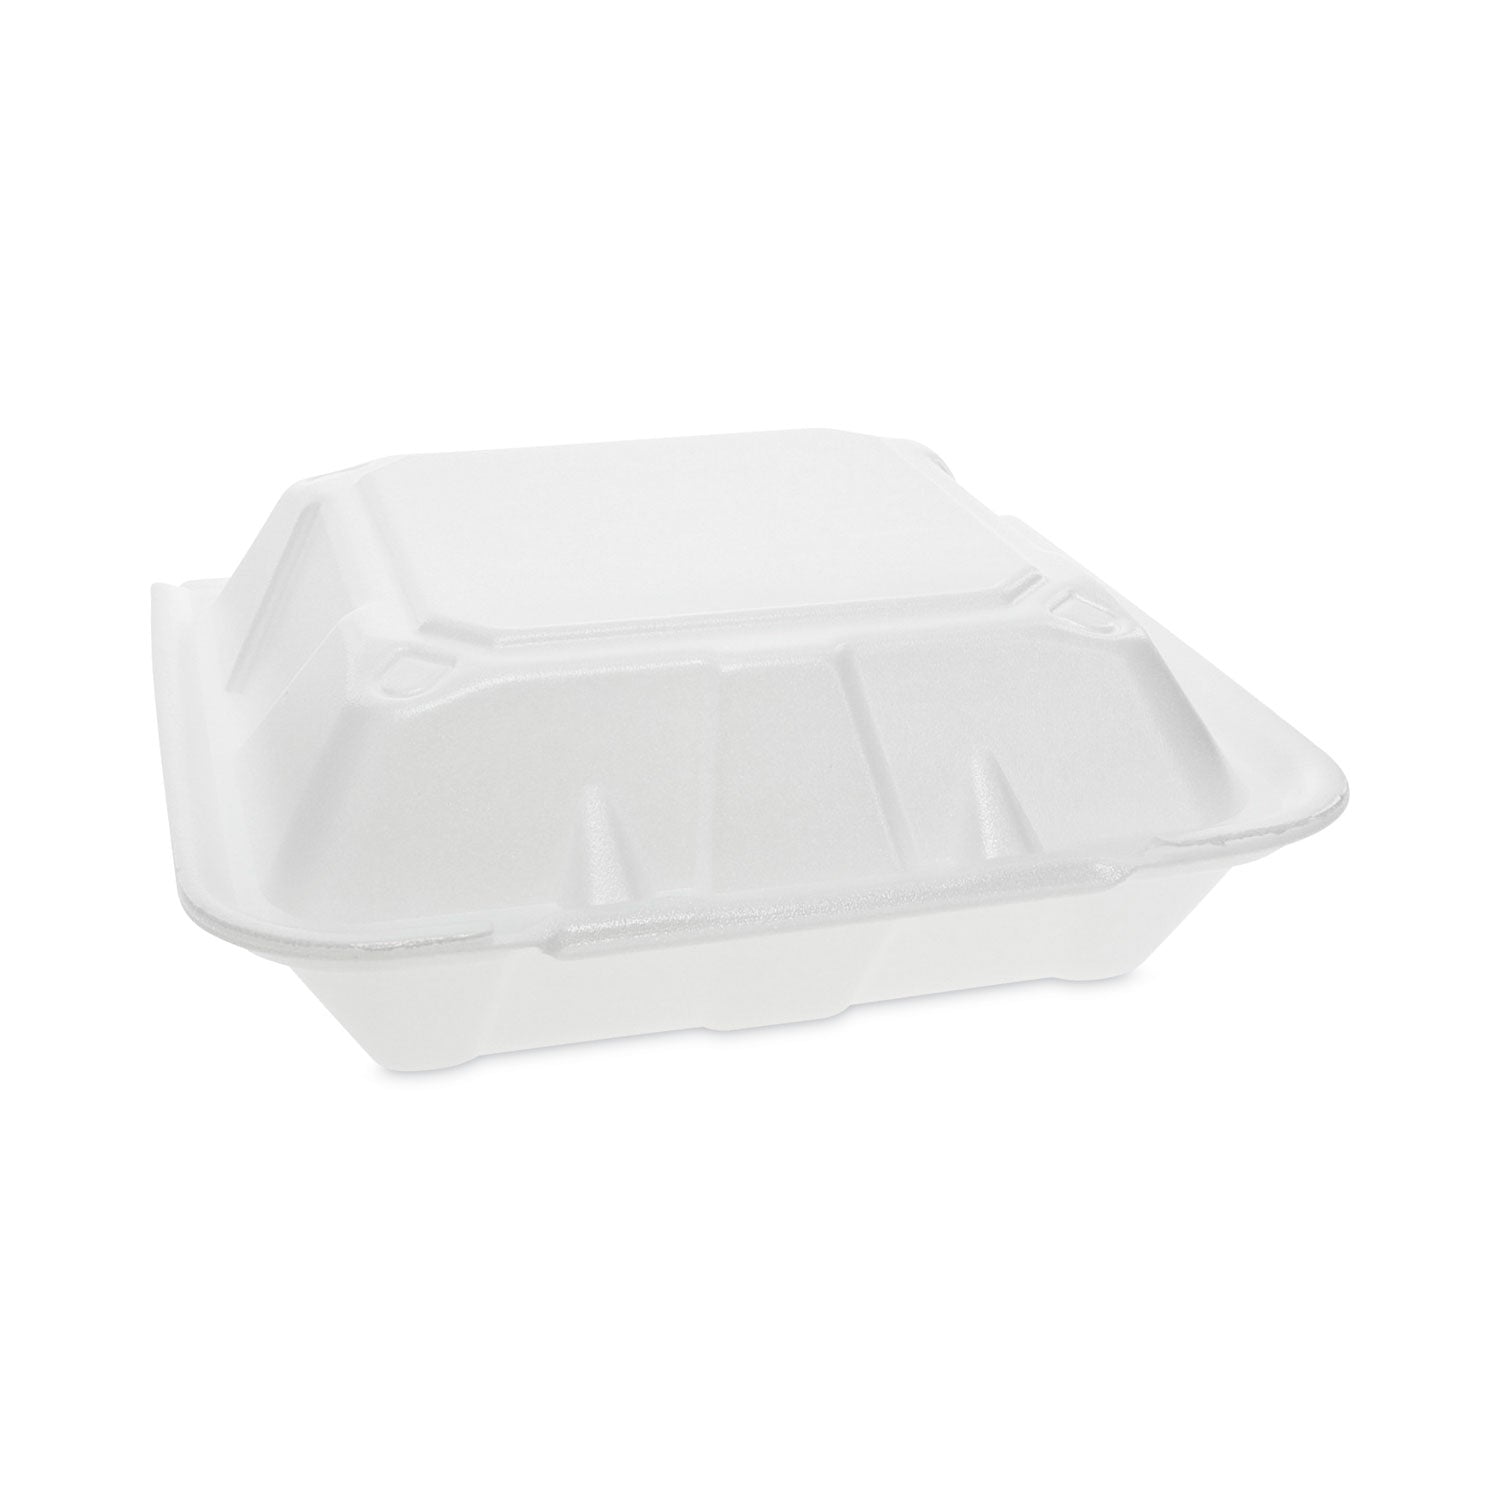 vented-foam-hinged-lid-container-dual-tab-lock-913-x-9-x-325-white-150-carton_pctytd199010000 - 1